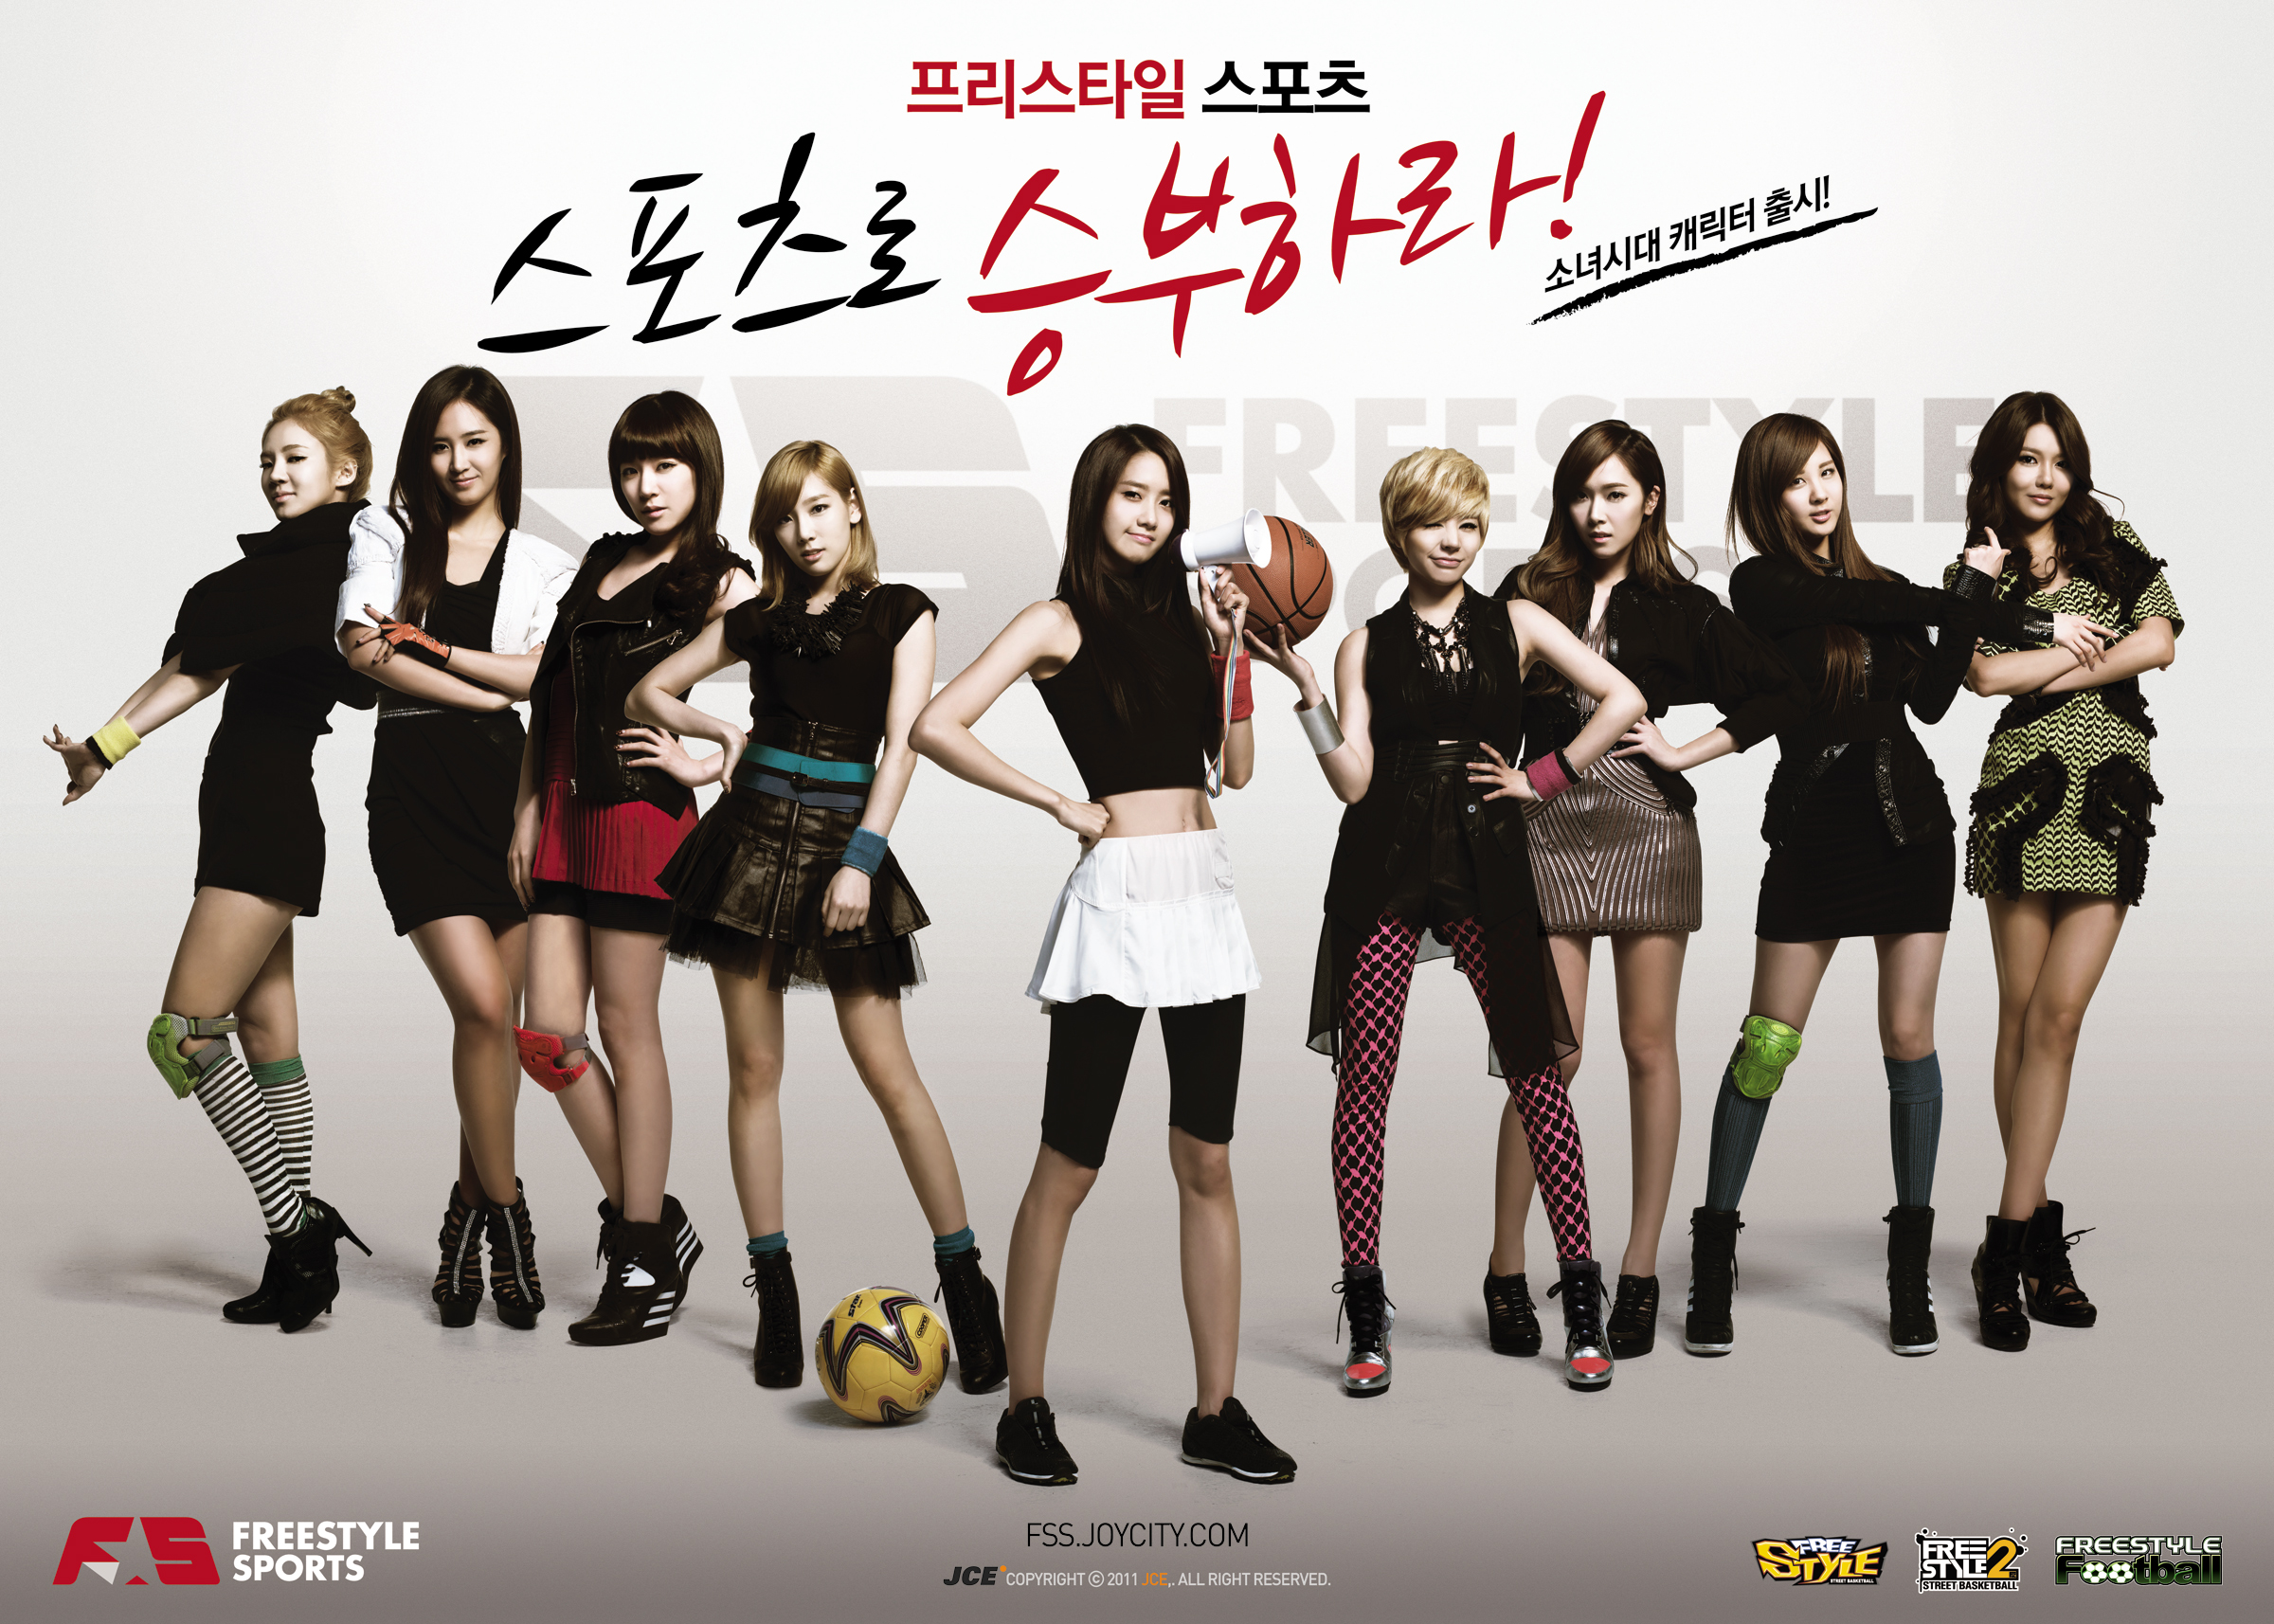 http://images5.fanpop.com/image/photos/28100000/SNSD-FreeStyle-Sports-Promotion-Pictures-s-E2-99-A5neism-28147940-2400-1714.jpg